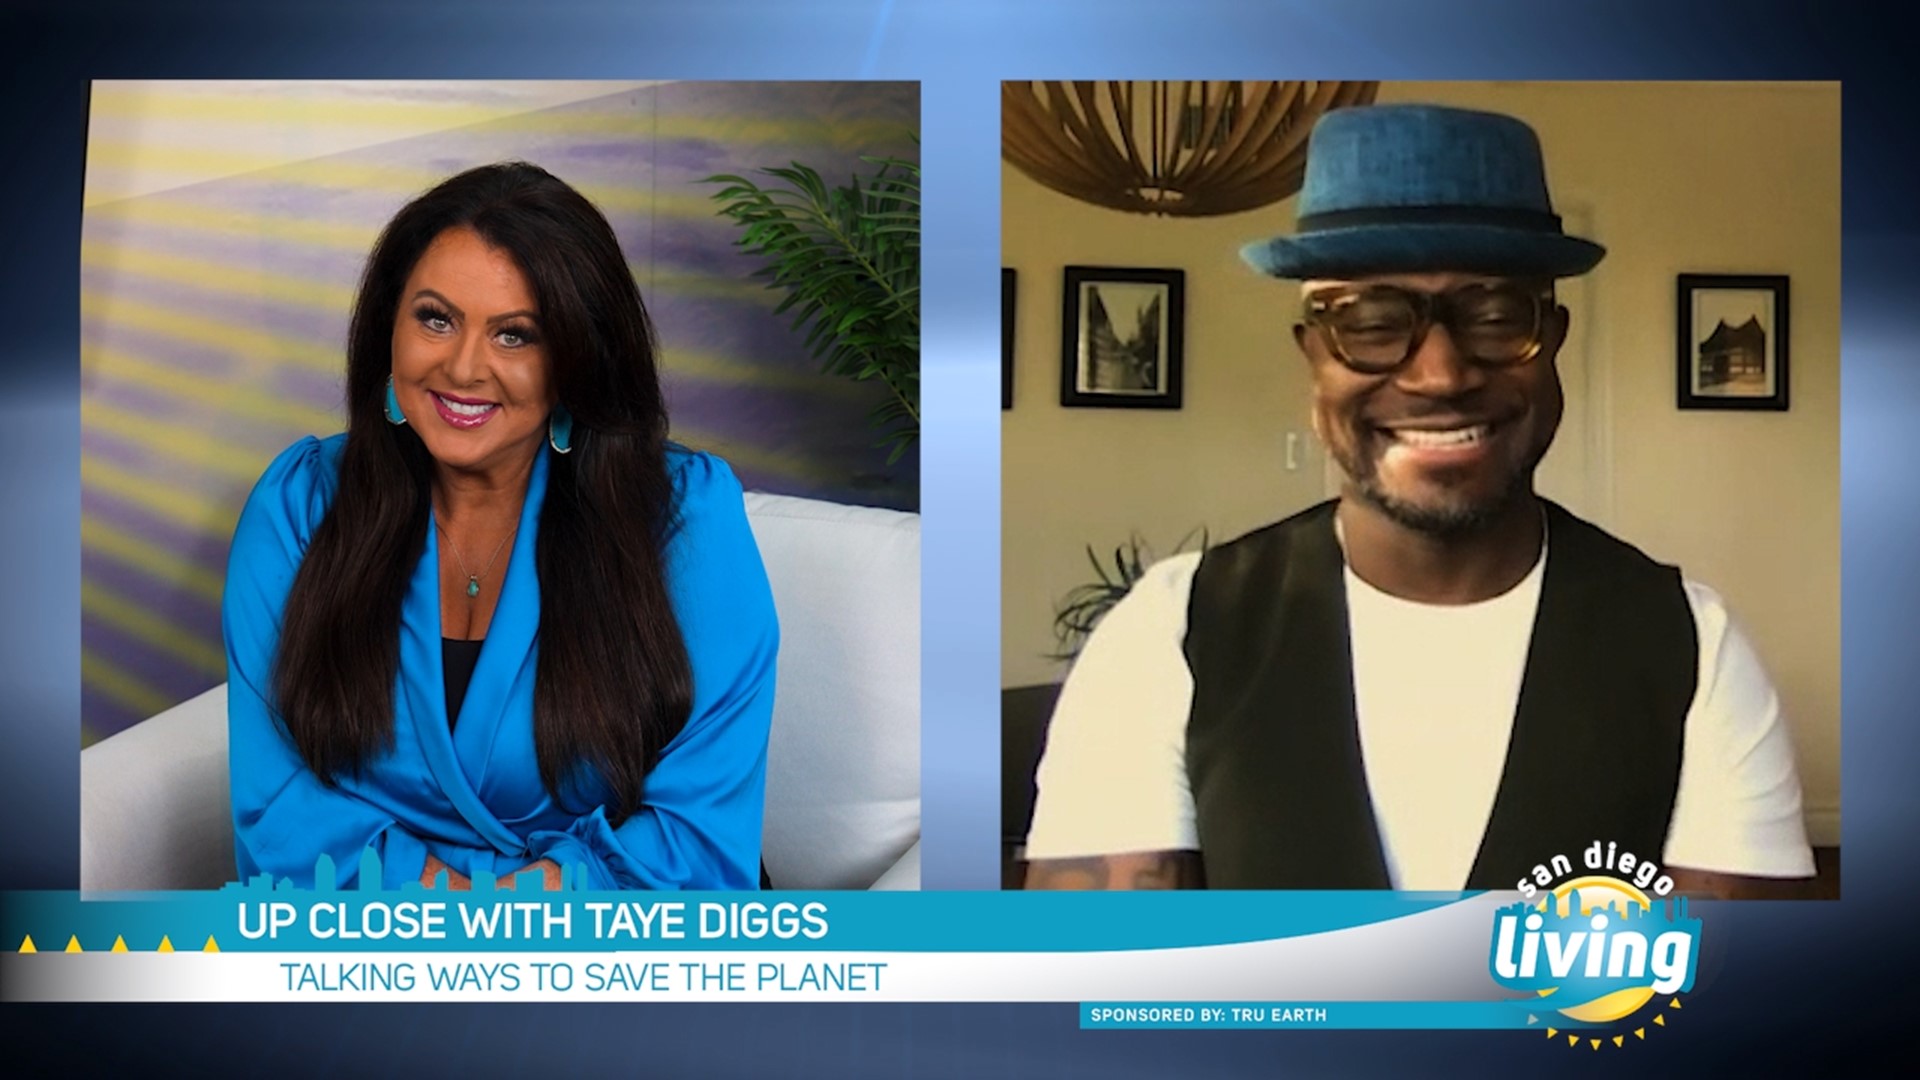 Film, TV and Broadway actor Taye Diggs joins Laura Cavanaugh to talk about easy ways to reduce plastic pollution and help save our planet. Sponsored by: Tru Earth